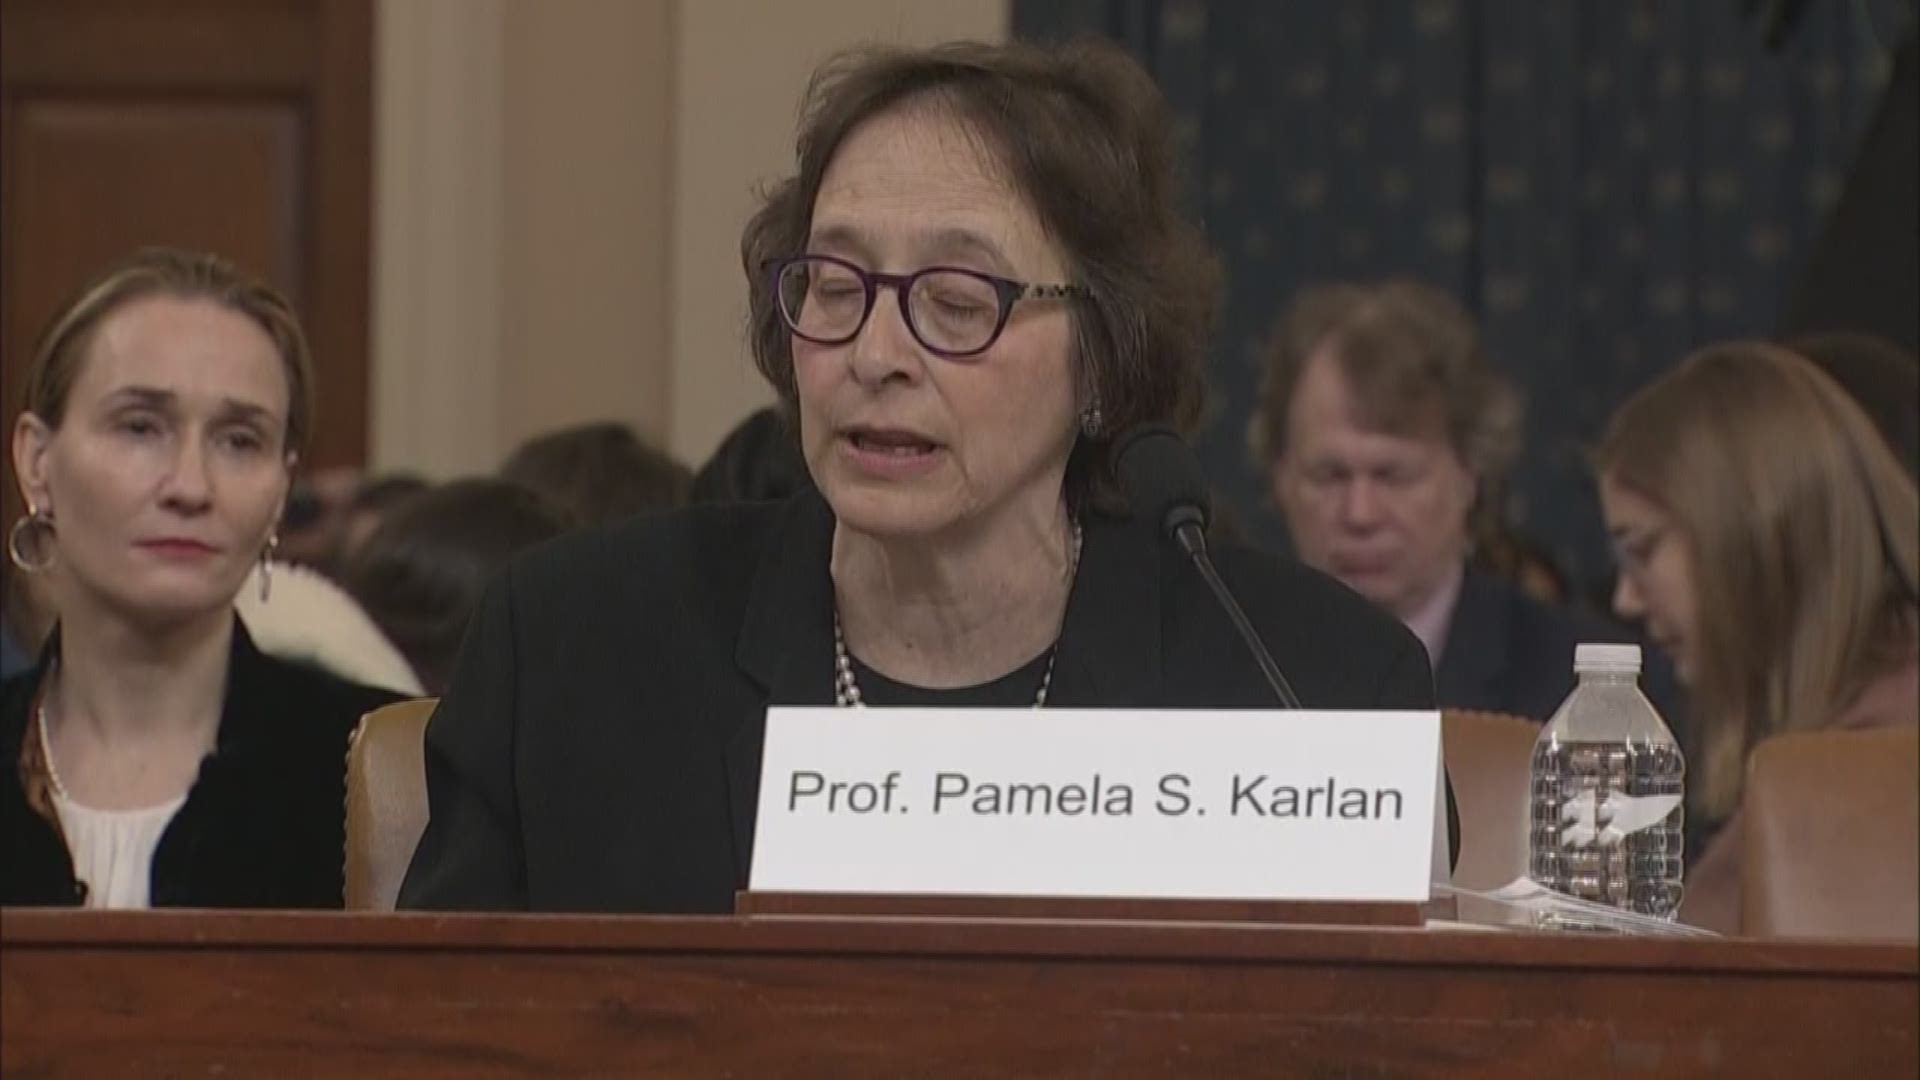 Professor Pamela Karlan started her testimony before the House Judiciary Committee by firing back at comments made by Congressman Doug Collins.